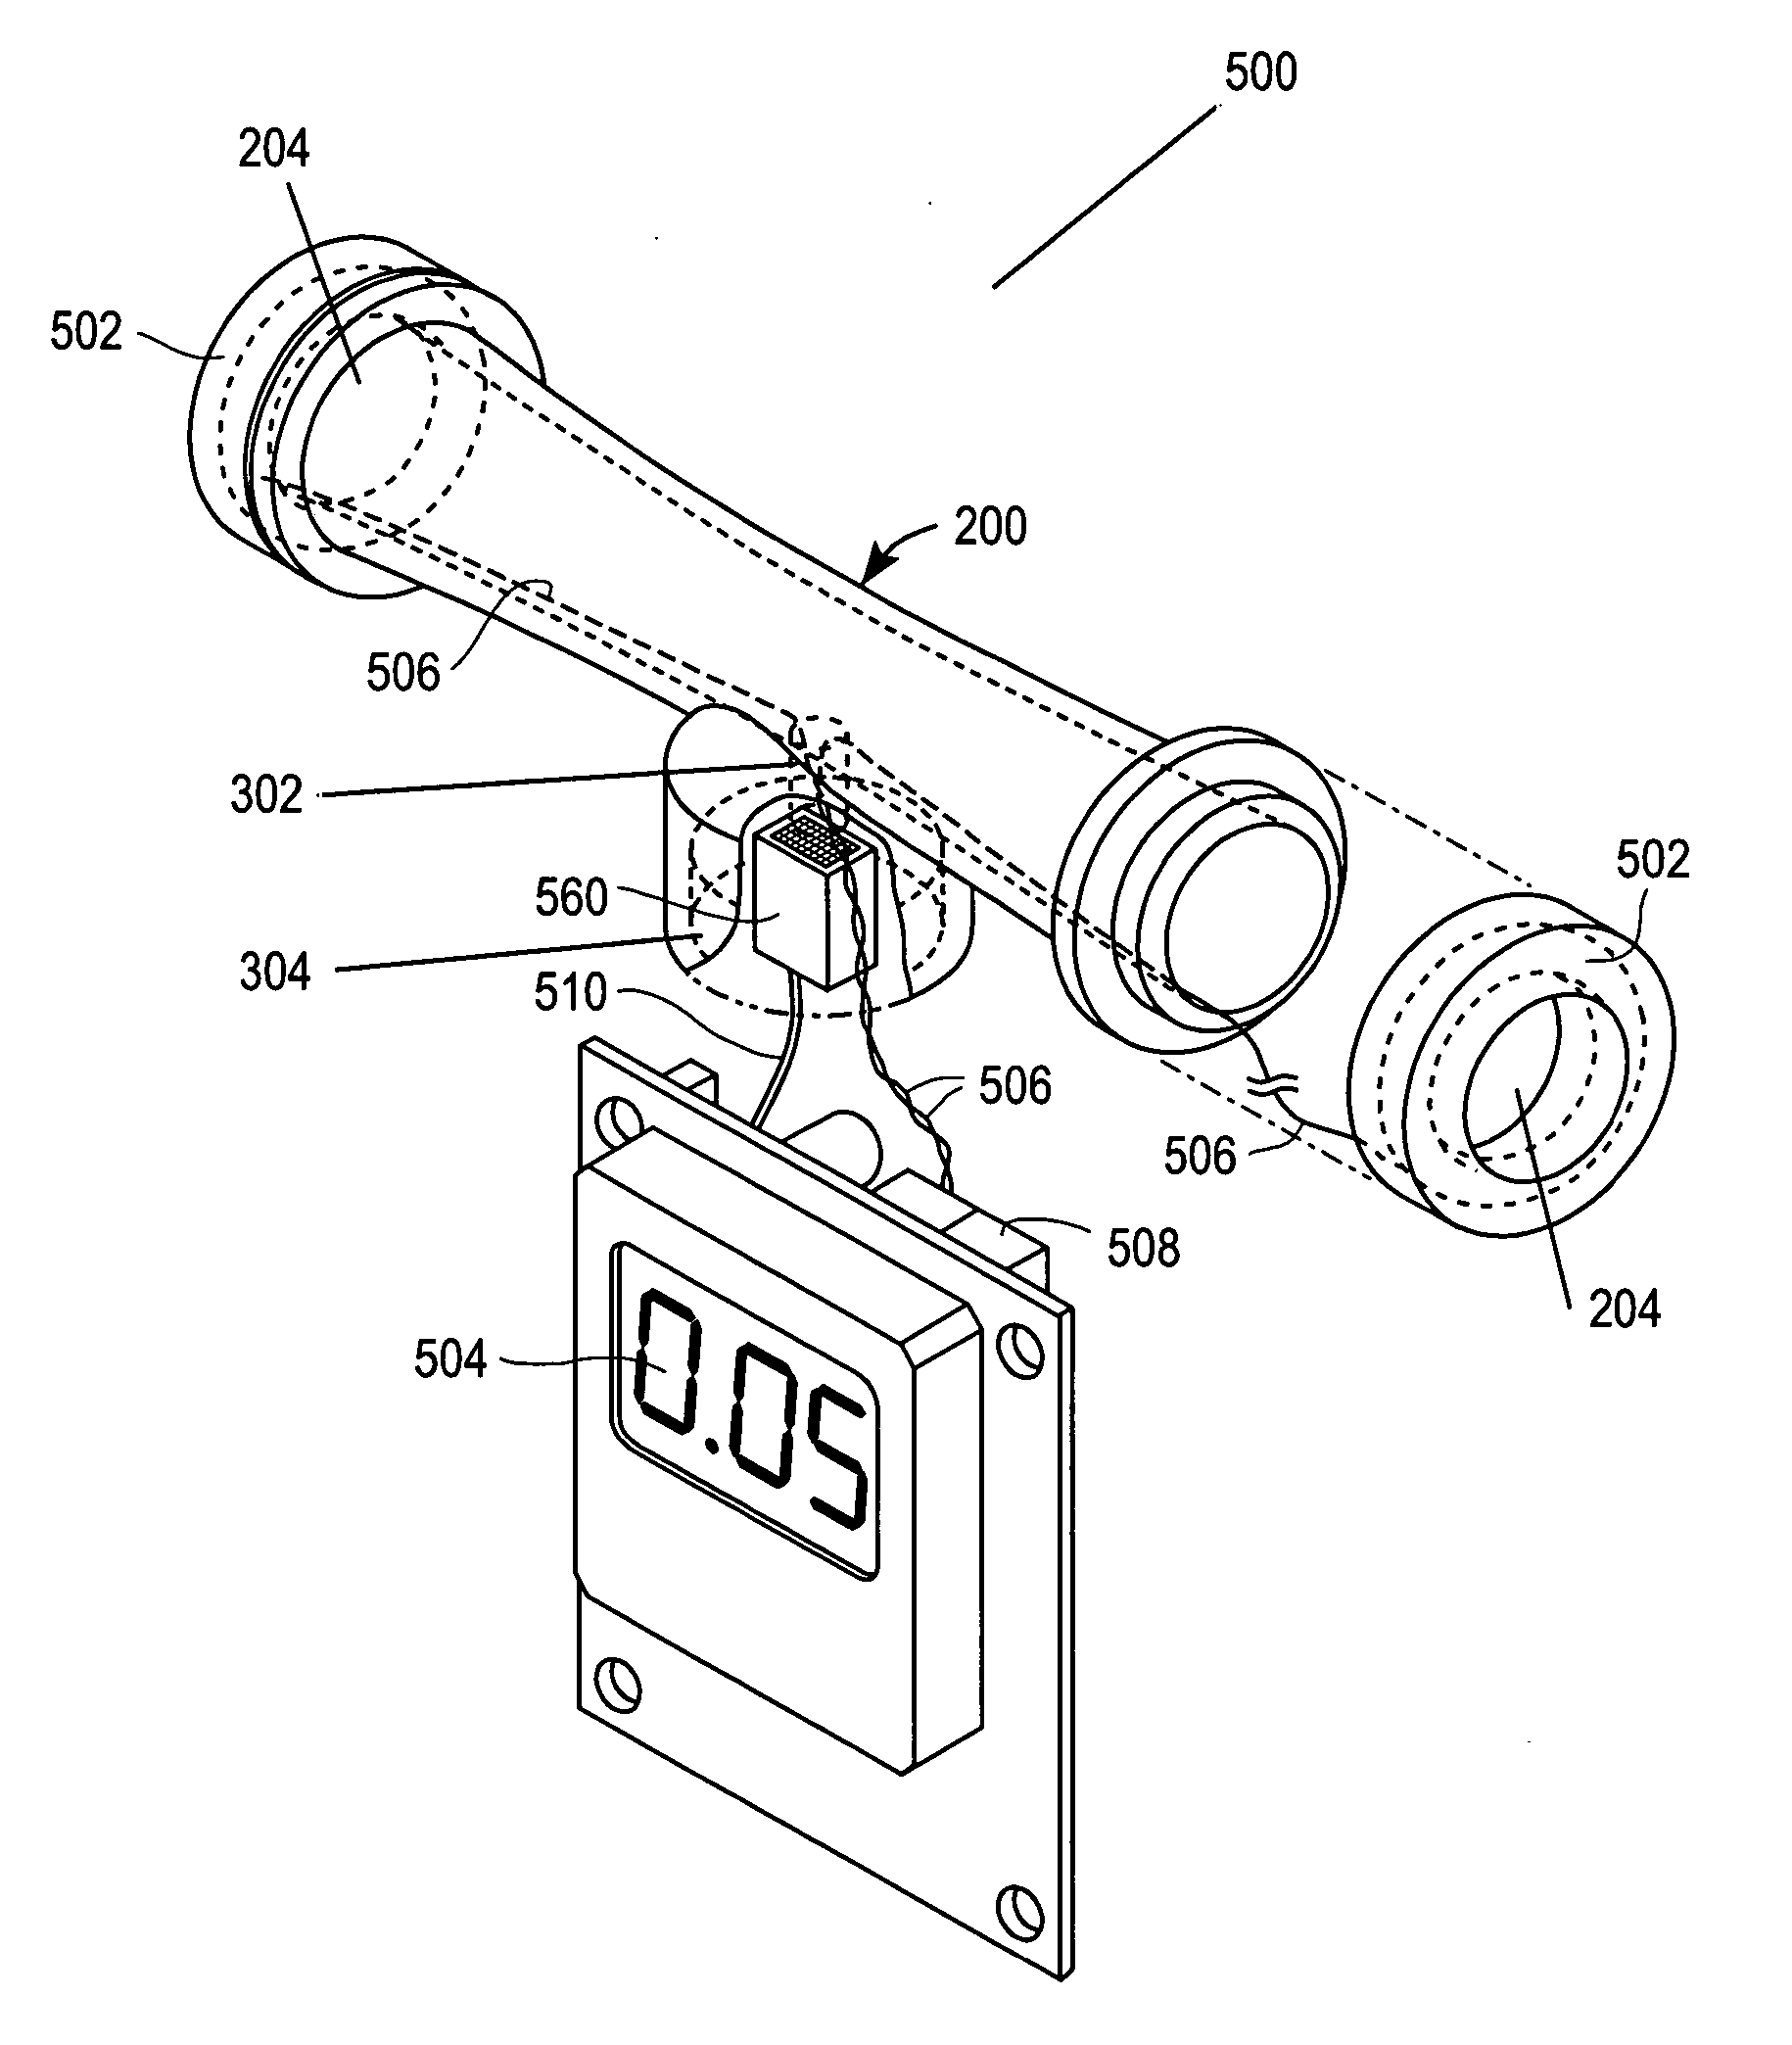 Dual entry collection device for breath analysis